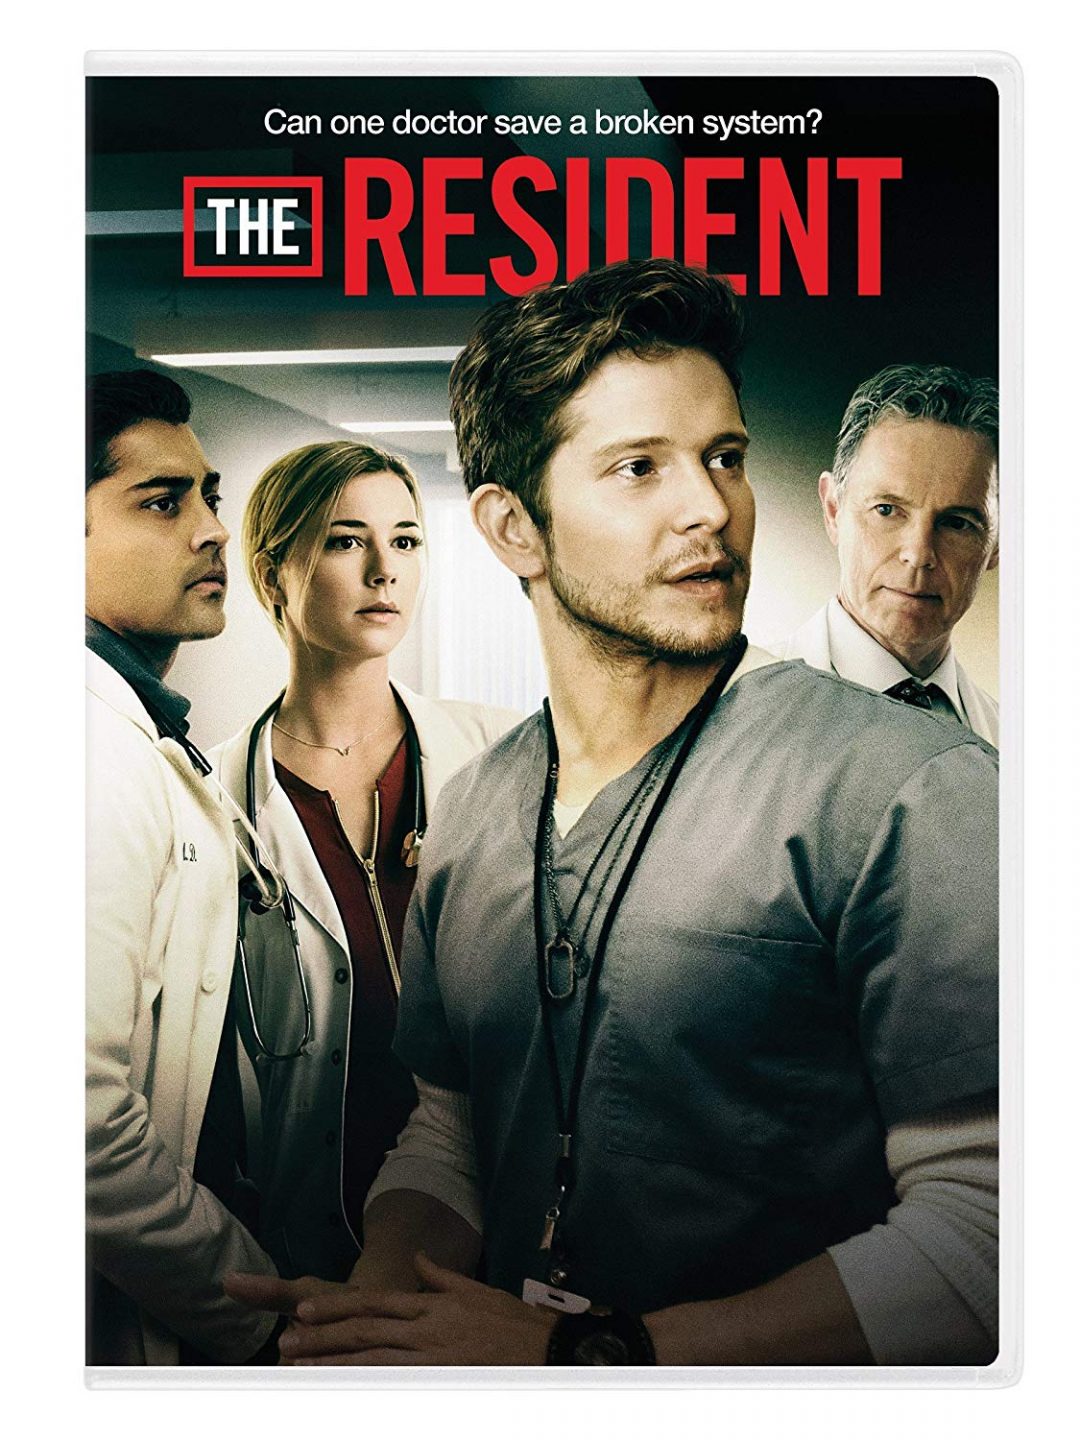 The Resident DVD cover (20th Century Fox Home Entertainment)